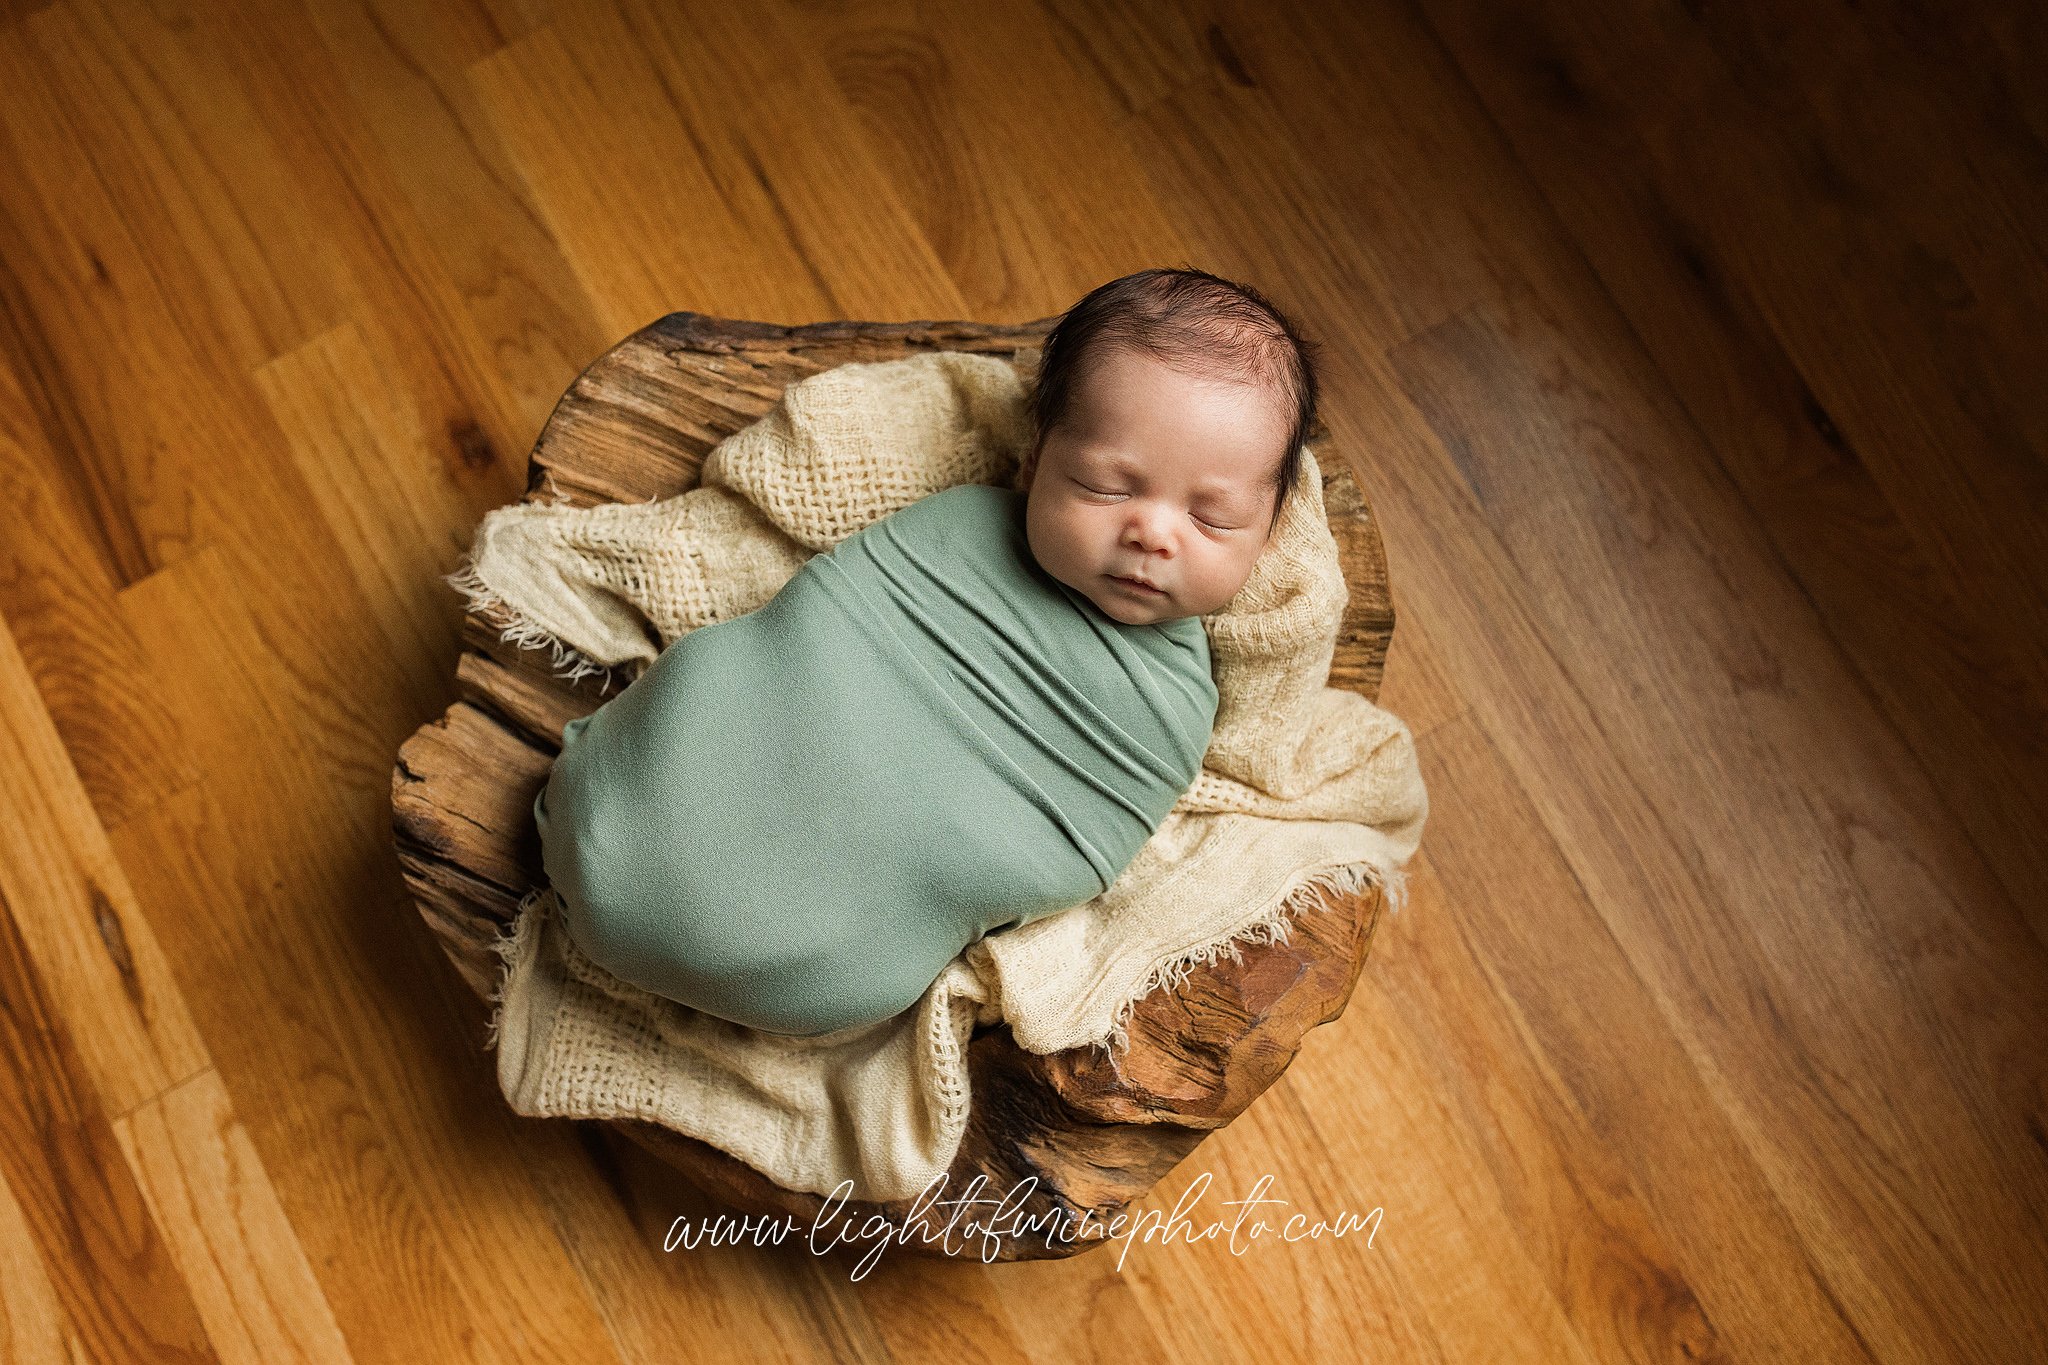 Upstate and Central NY Newborn Photographer